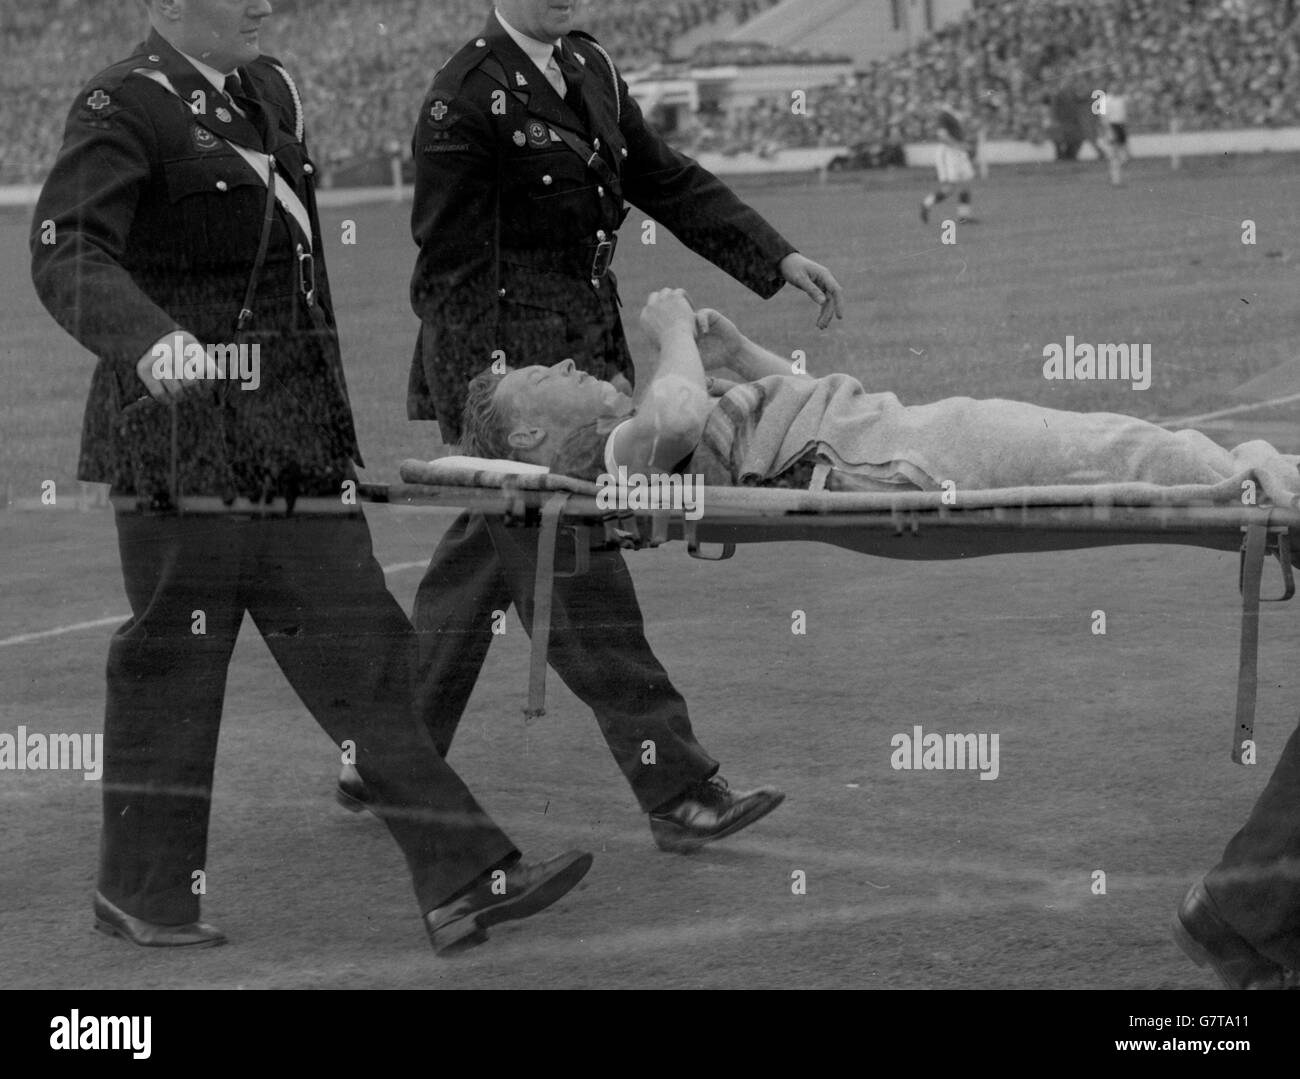 Nottingham Forest outside right Roy Dwight, who scored his team's first goal, is carried off the furled on a stretcher after a collision with another player during the FA Cup final at Wembley. He was taken to hospital with a suspected broken leg. Stock Photo